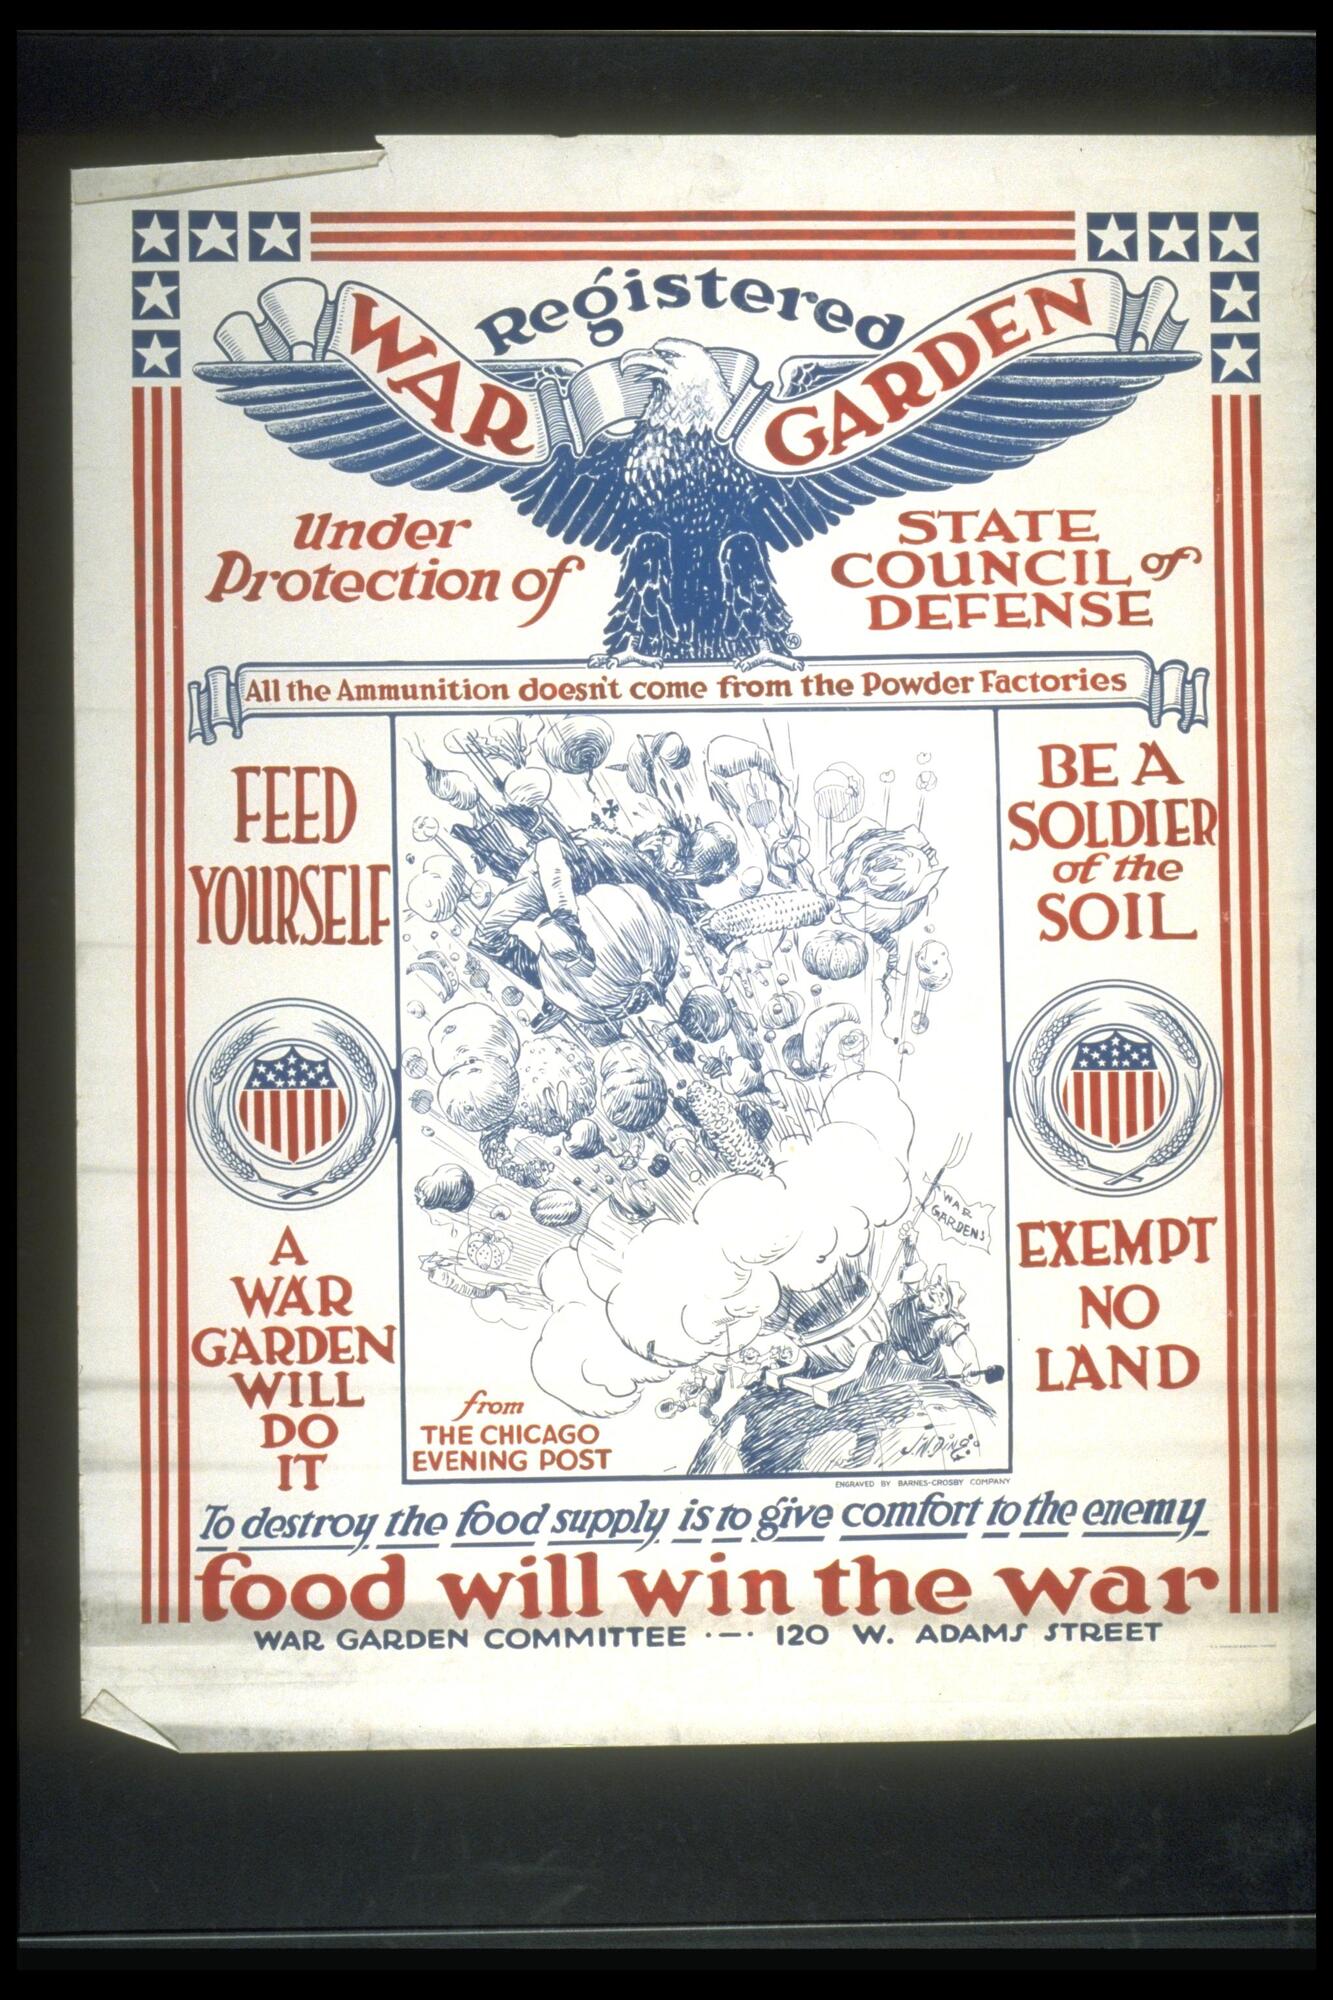 Text: Registered War Garden Under Protection of State Council of Defense - All the Ammunition doesn&#39;t come from the Power Factories - Feed Yourself - Be a Soldier of the Soil - A War Garden Will Do It - Exempt No Land - from The Chicago Evening Post - To destroy the food supply is to give comfort to the enemy - food will win the war - War Garden Committee - 120 W. Adams Street